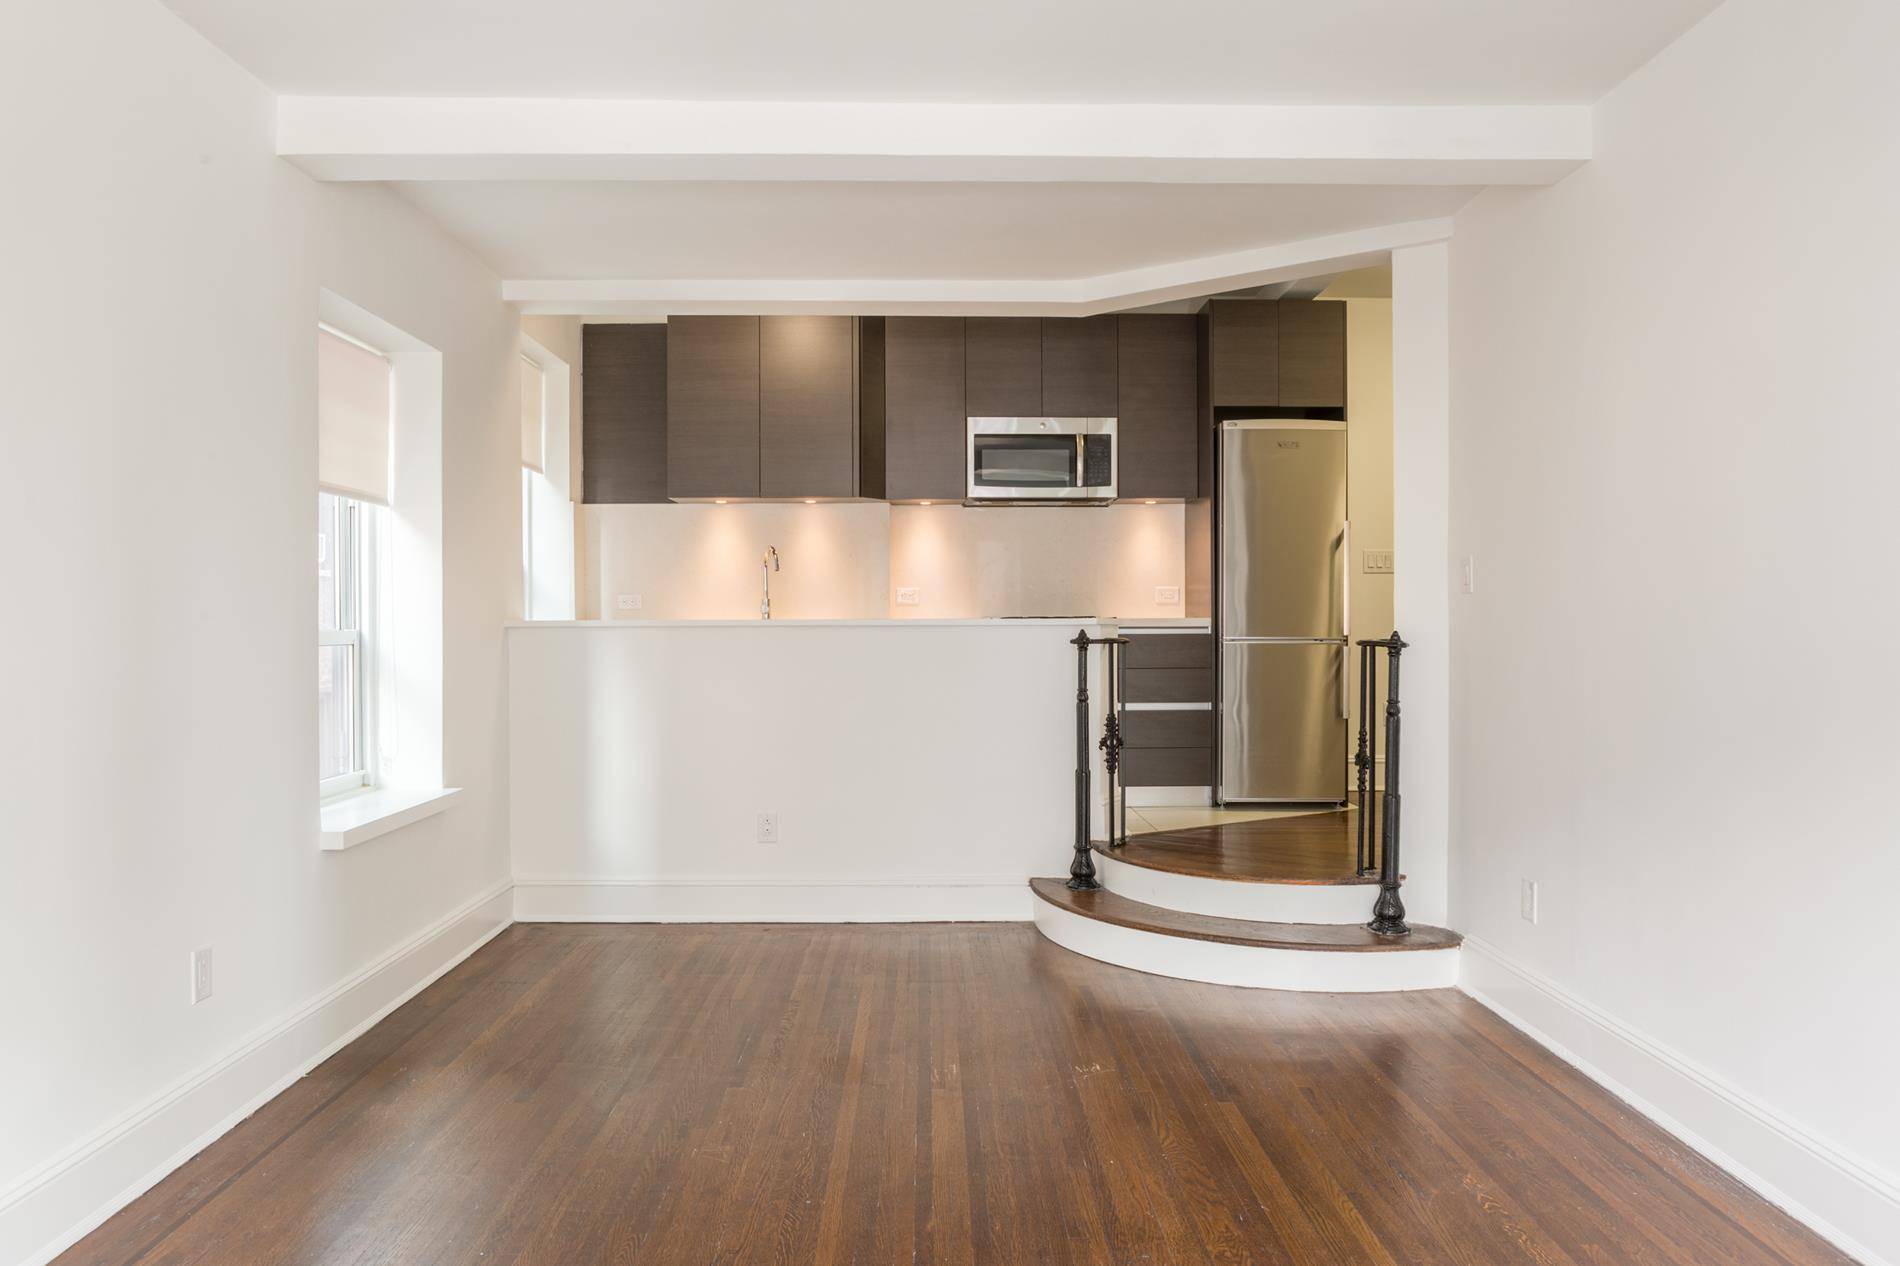 Newly Renovated 1 BR Corner Apt In Lovely Morningside Heights. 1 Month FREE On A 13 Month Lease!